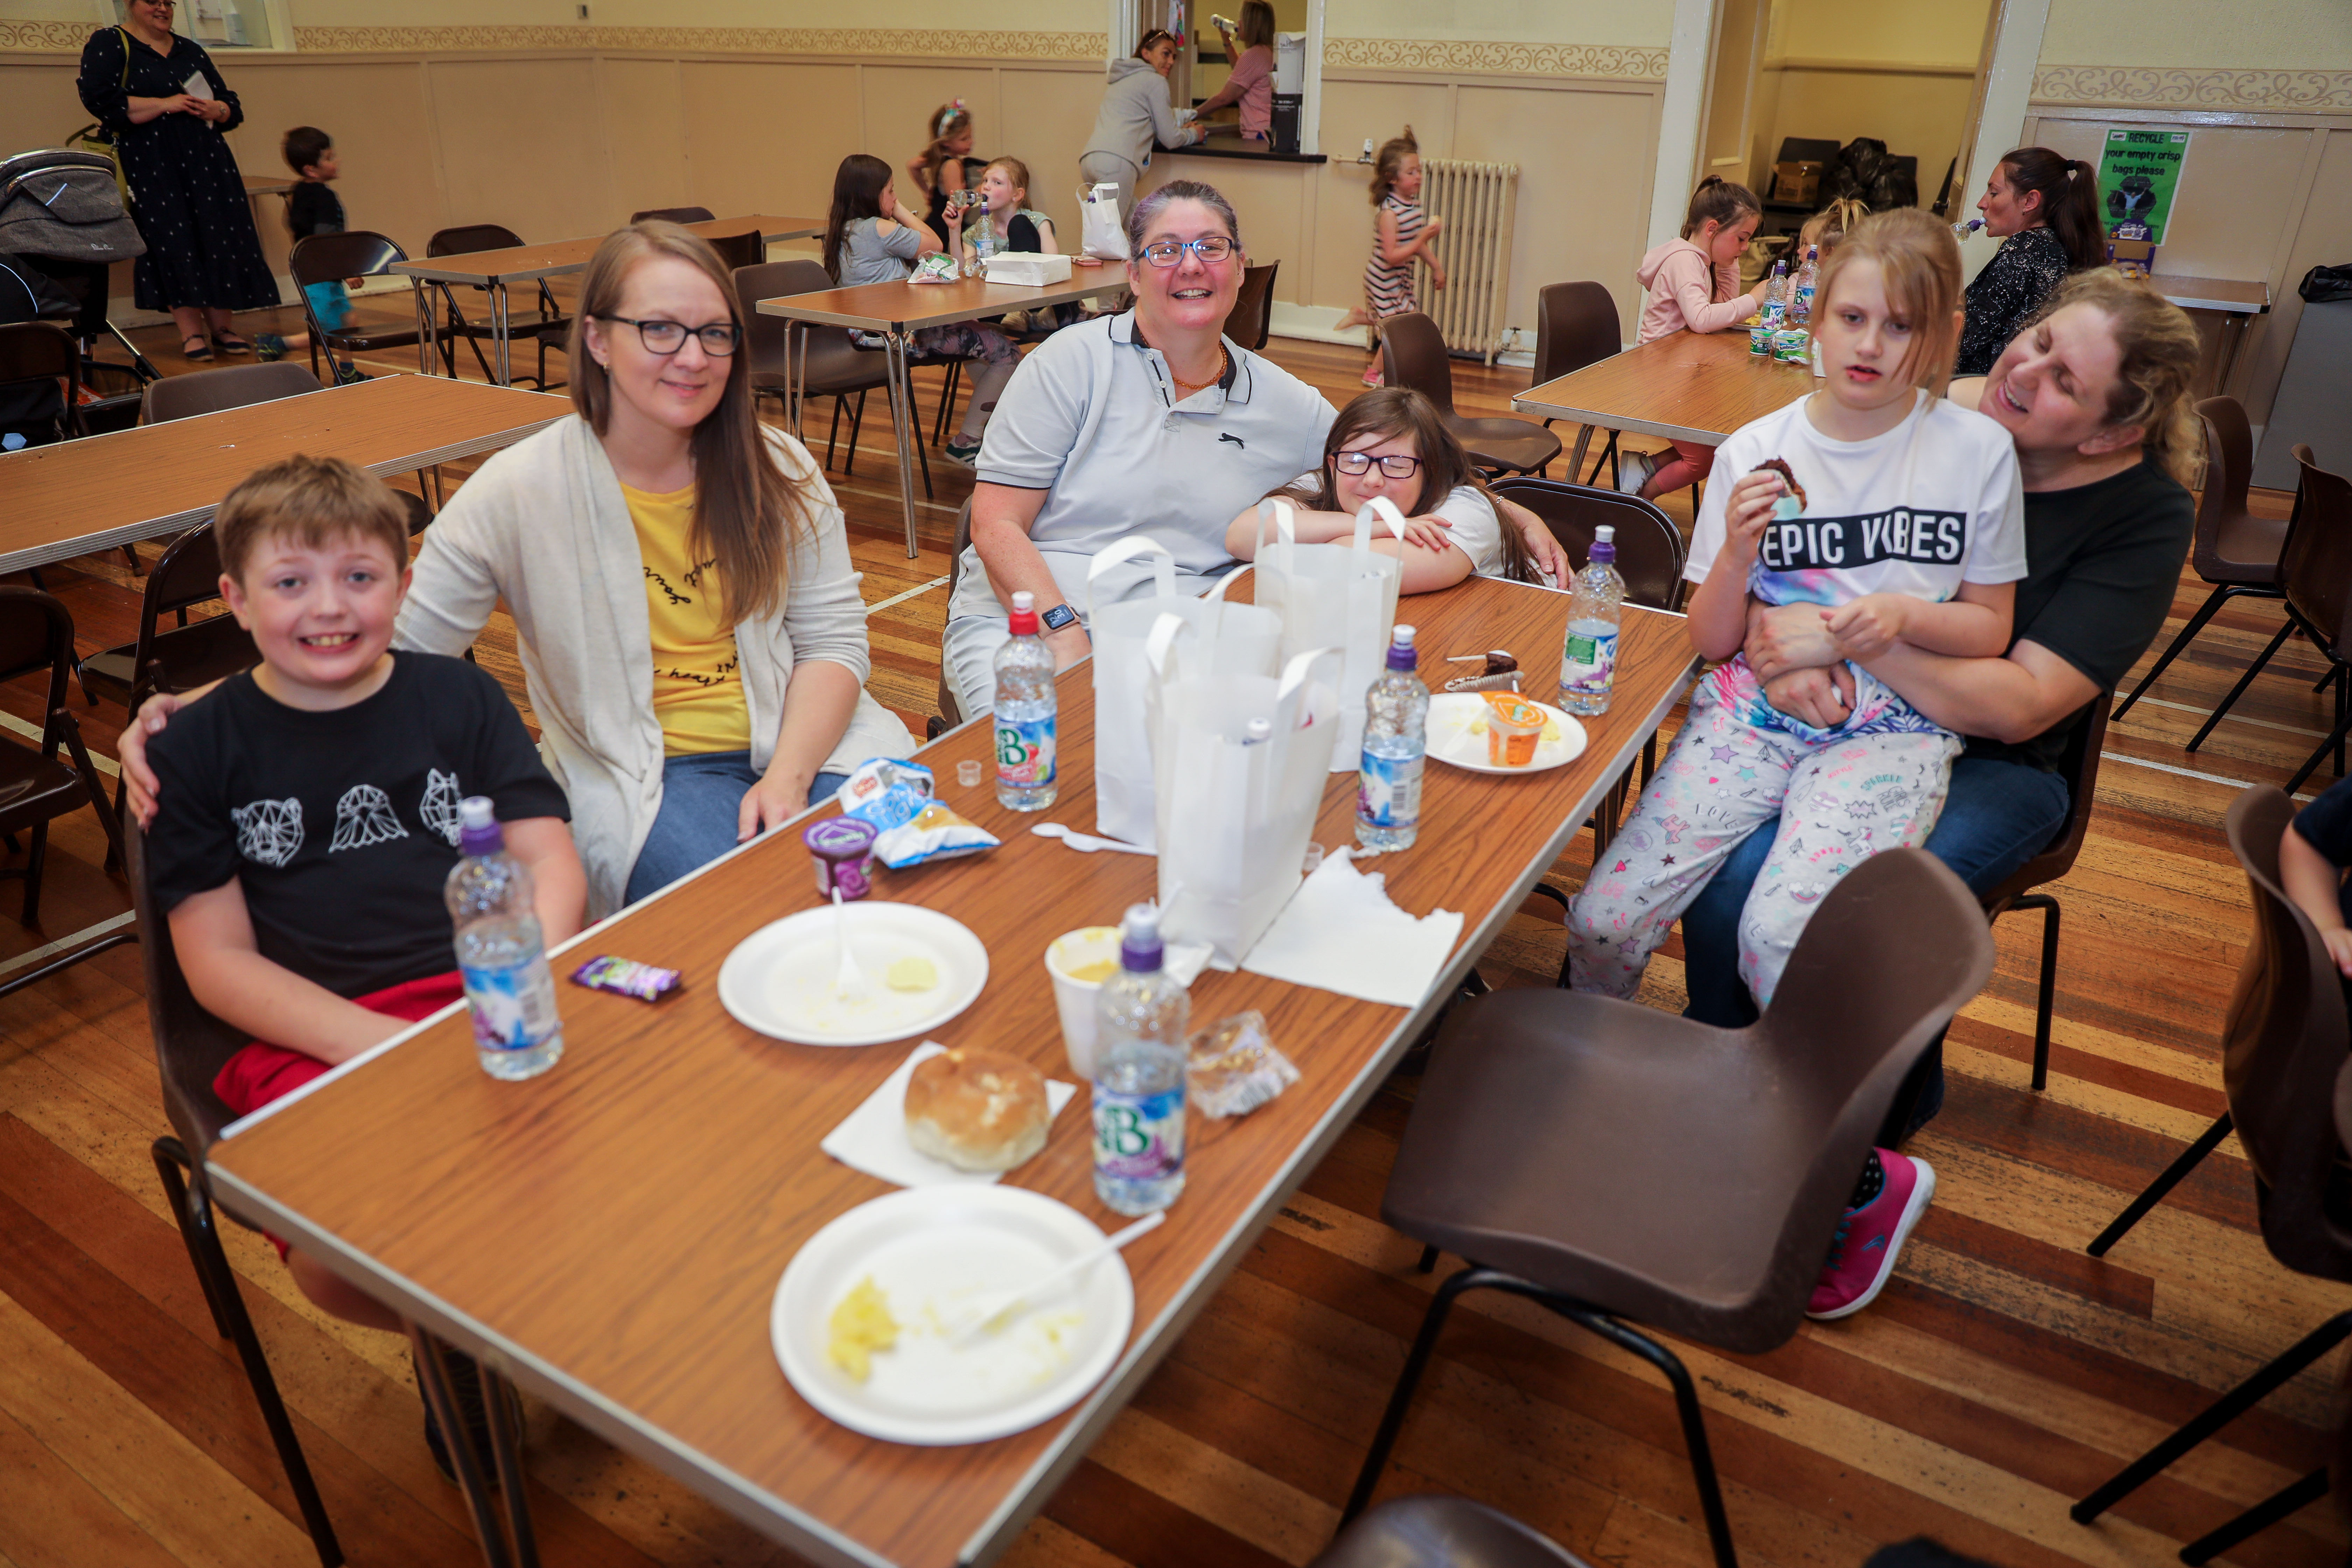 Logan Caterson (9), Dawn Cateron (39), Sharon Sutherland (45), Amber Sutherland (8), Sarah Maddison (37) and Alyssa Maddison (8) had a great lunch as part of Cafe Inc.